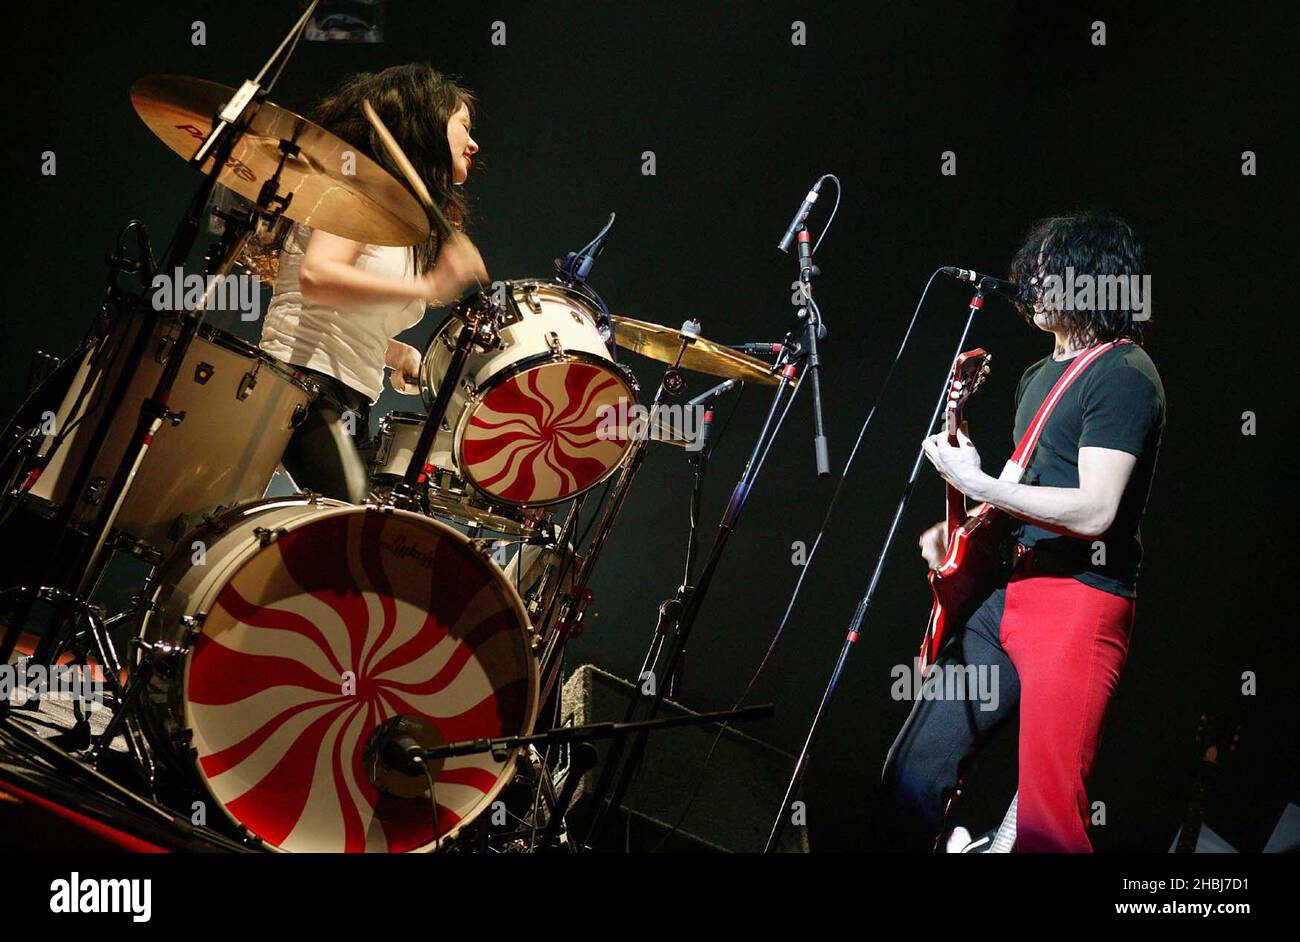 The White Stripes (Meg and Jack White)perform on stage at Carling Brixton Academy, London. Stock Photo